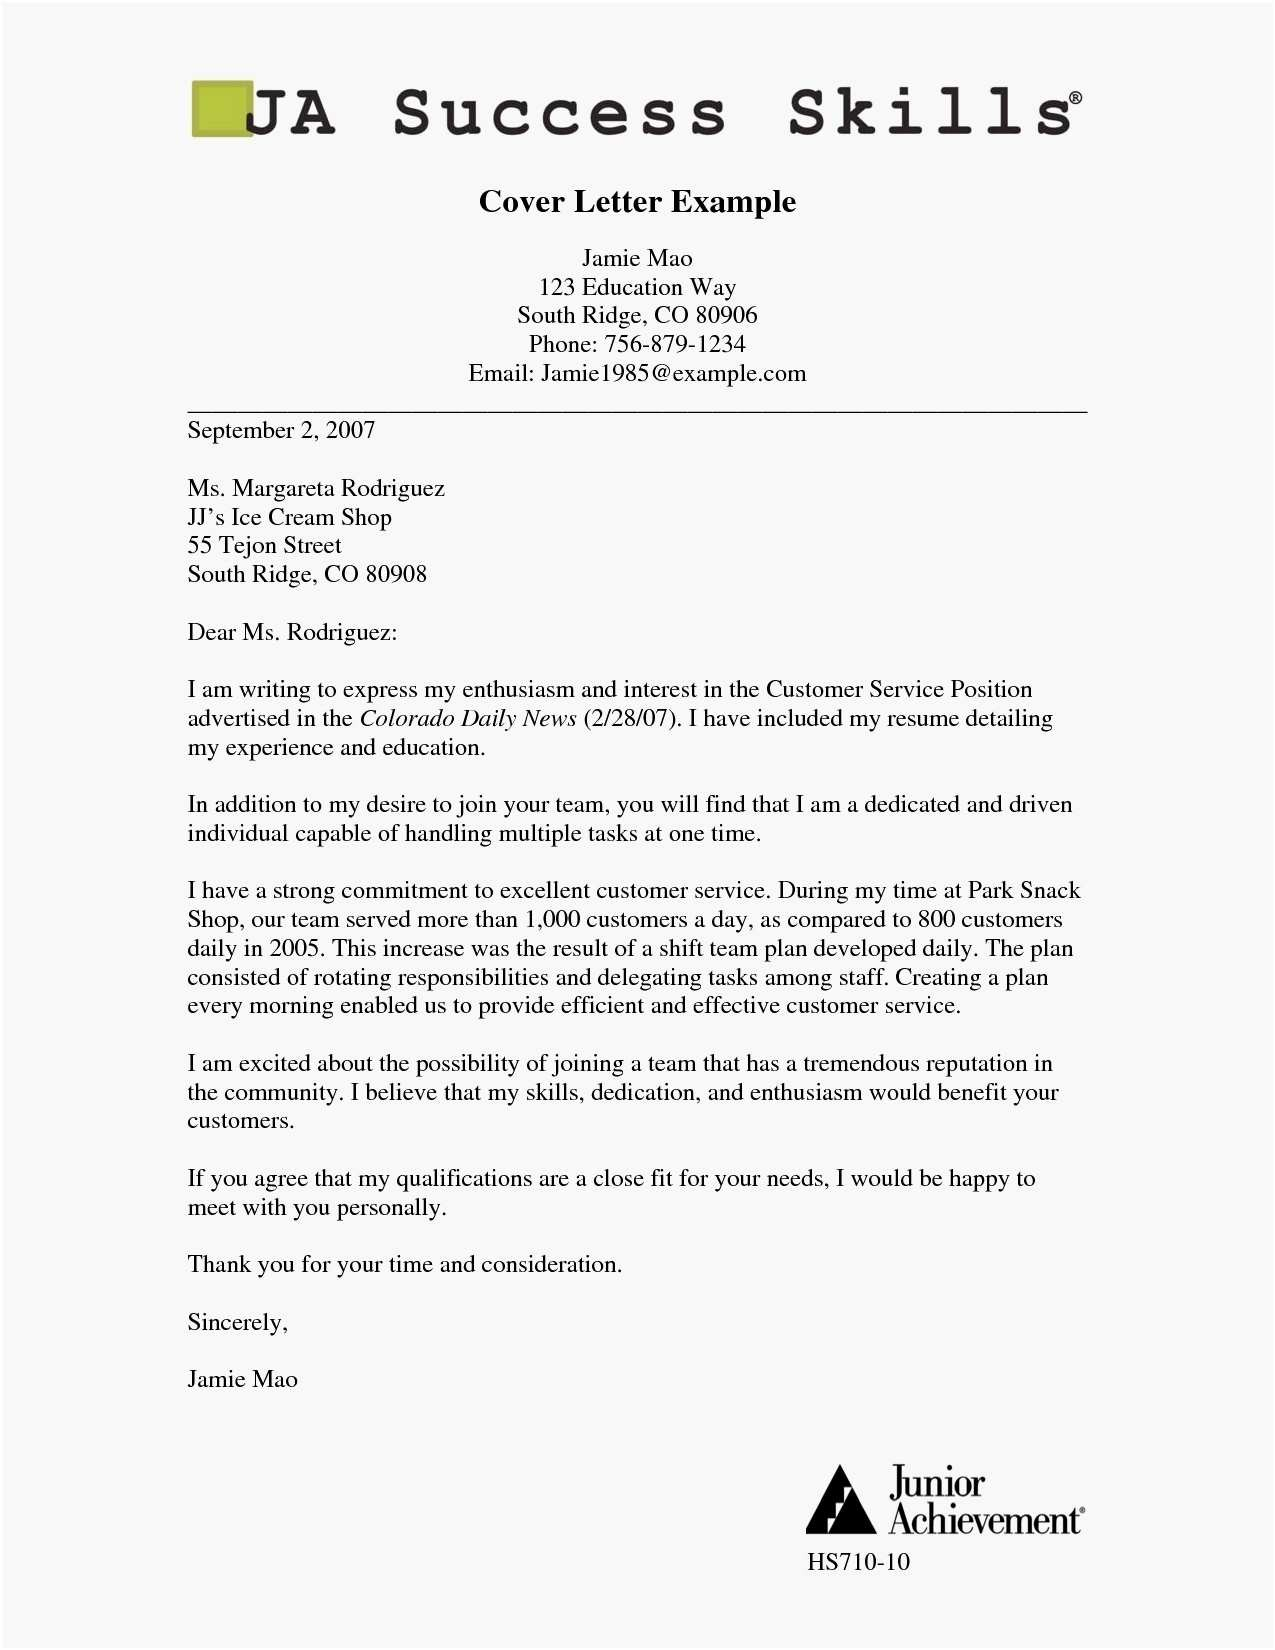 Cute Cover Letter Template - Letter format for Cover Letter Sample Cover Letter Employment